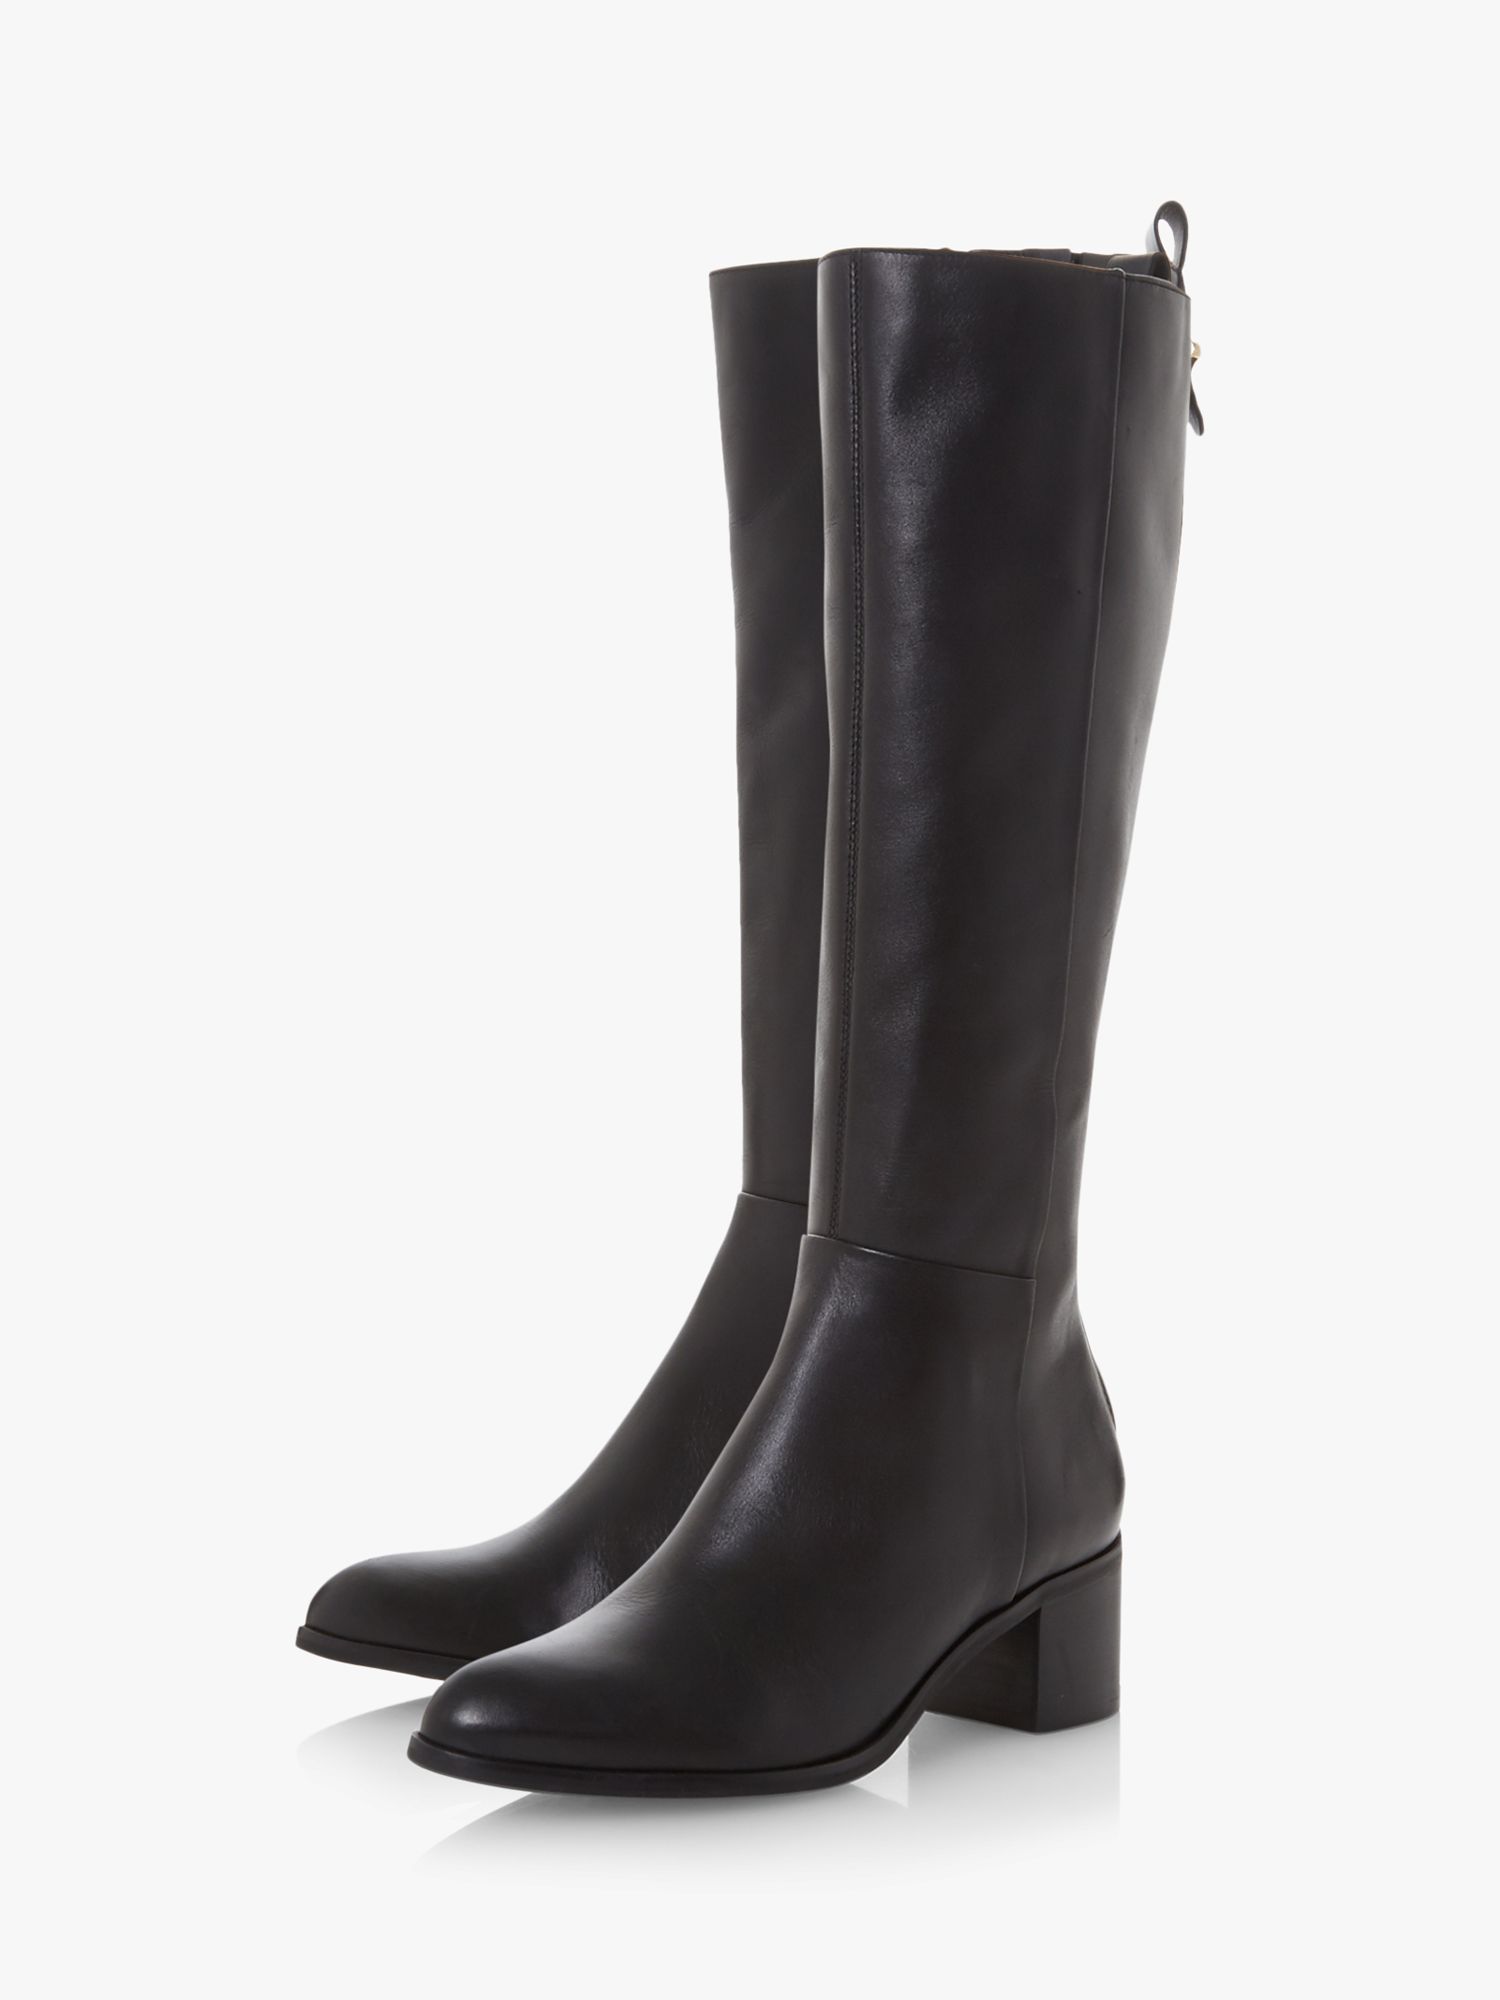 Dune Truth Pull-Tab Detail Knee High Boots, Black